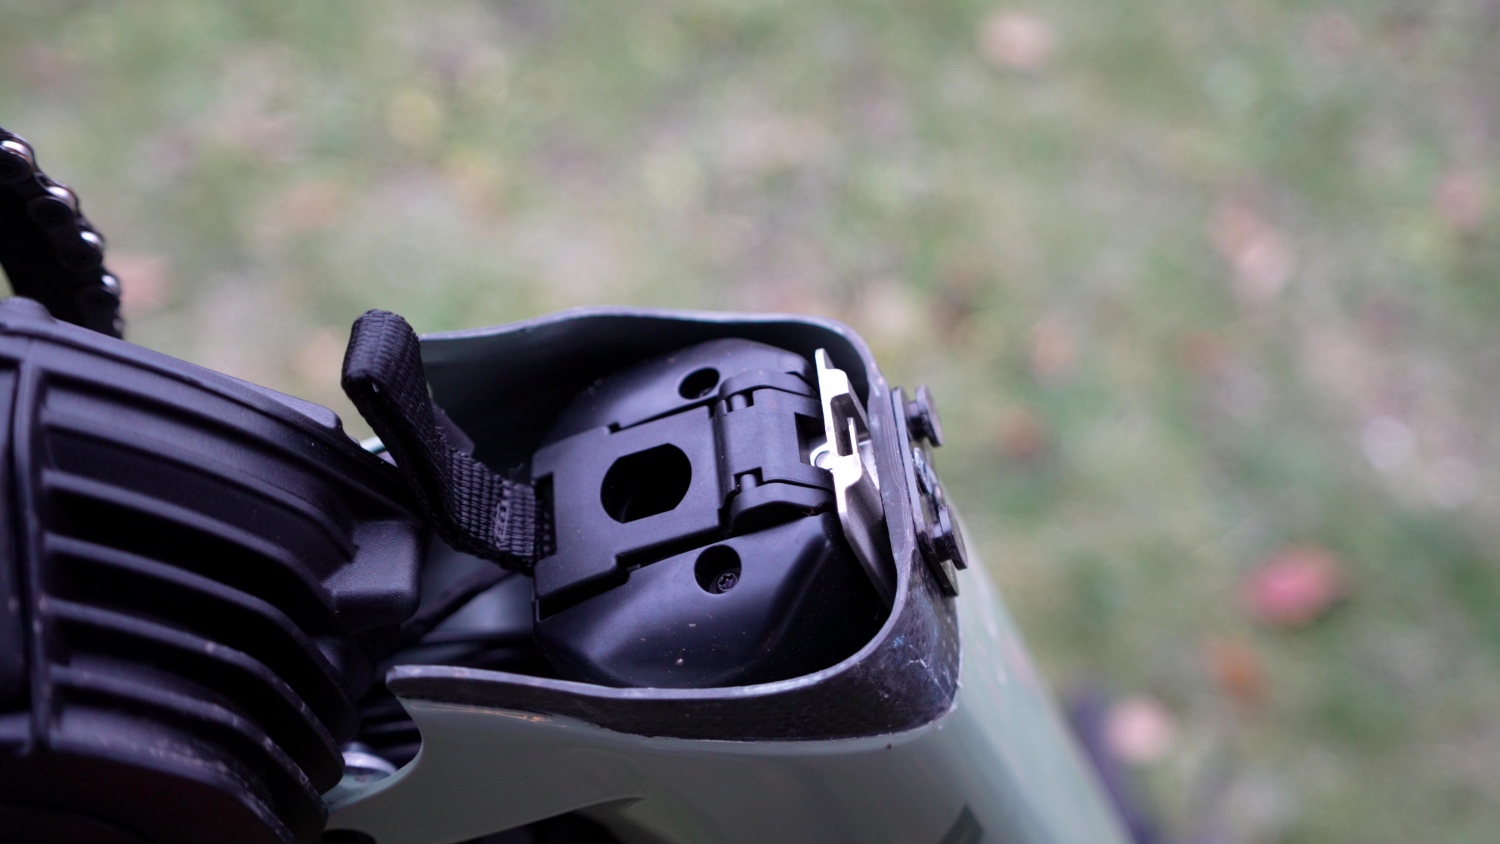 The Bosch battery latch, no cracks on our demo bike.